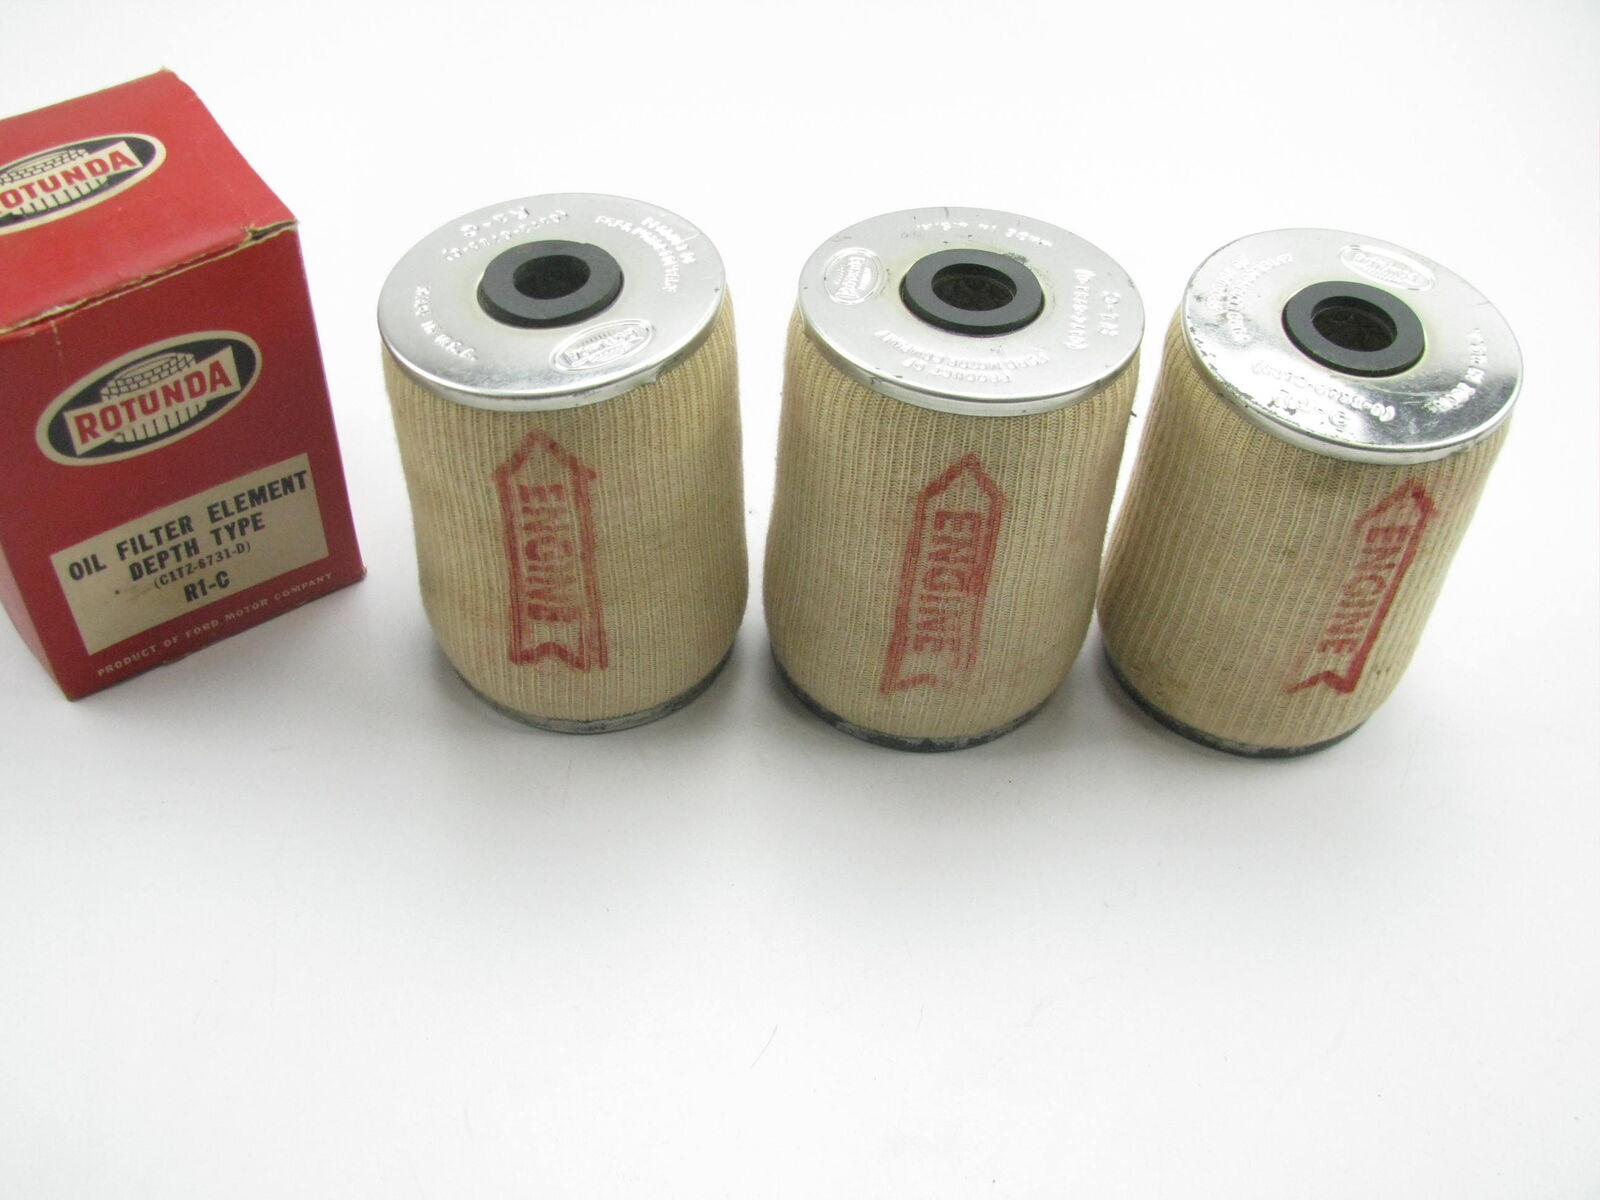 (3) Vintage Rotunda R1C Oil Filter Elements - Replaces FORD # C1TZ-6731-D 3-PACK